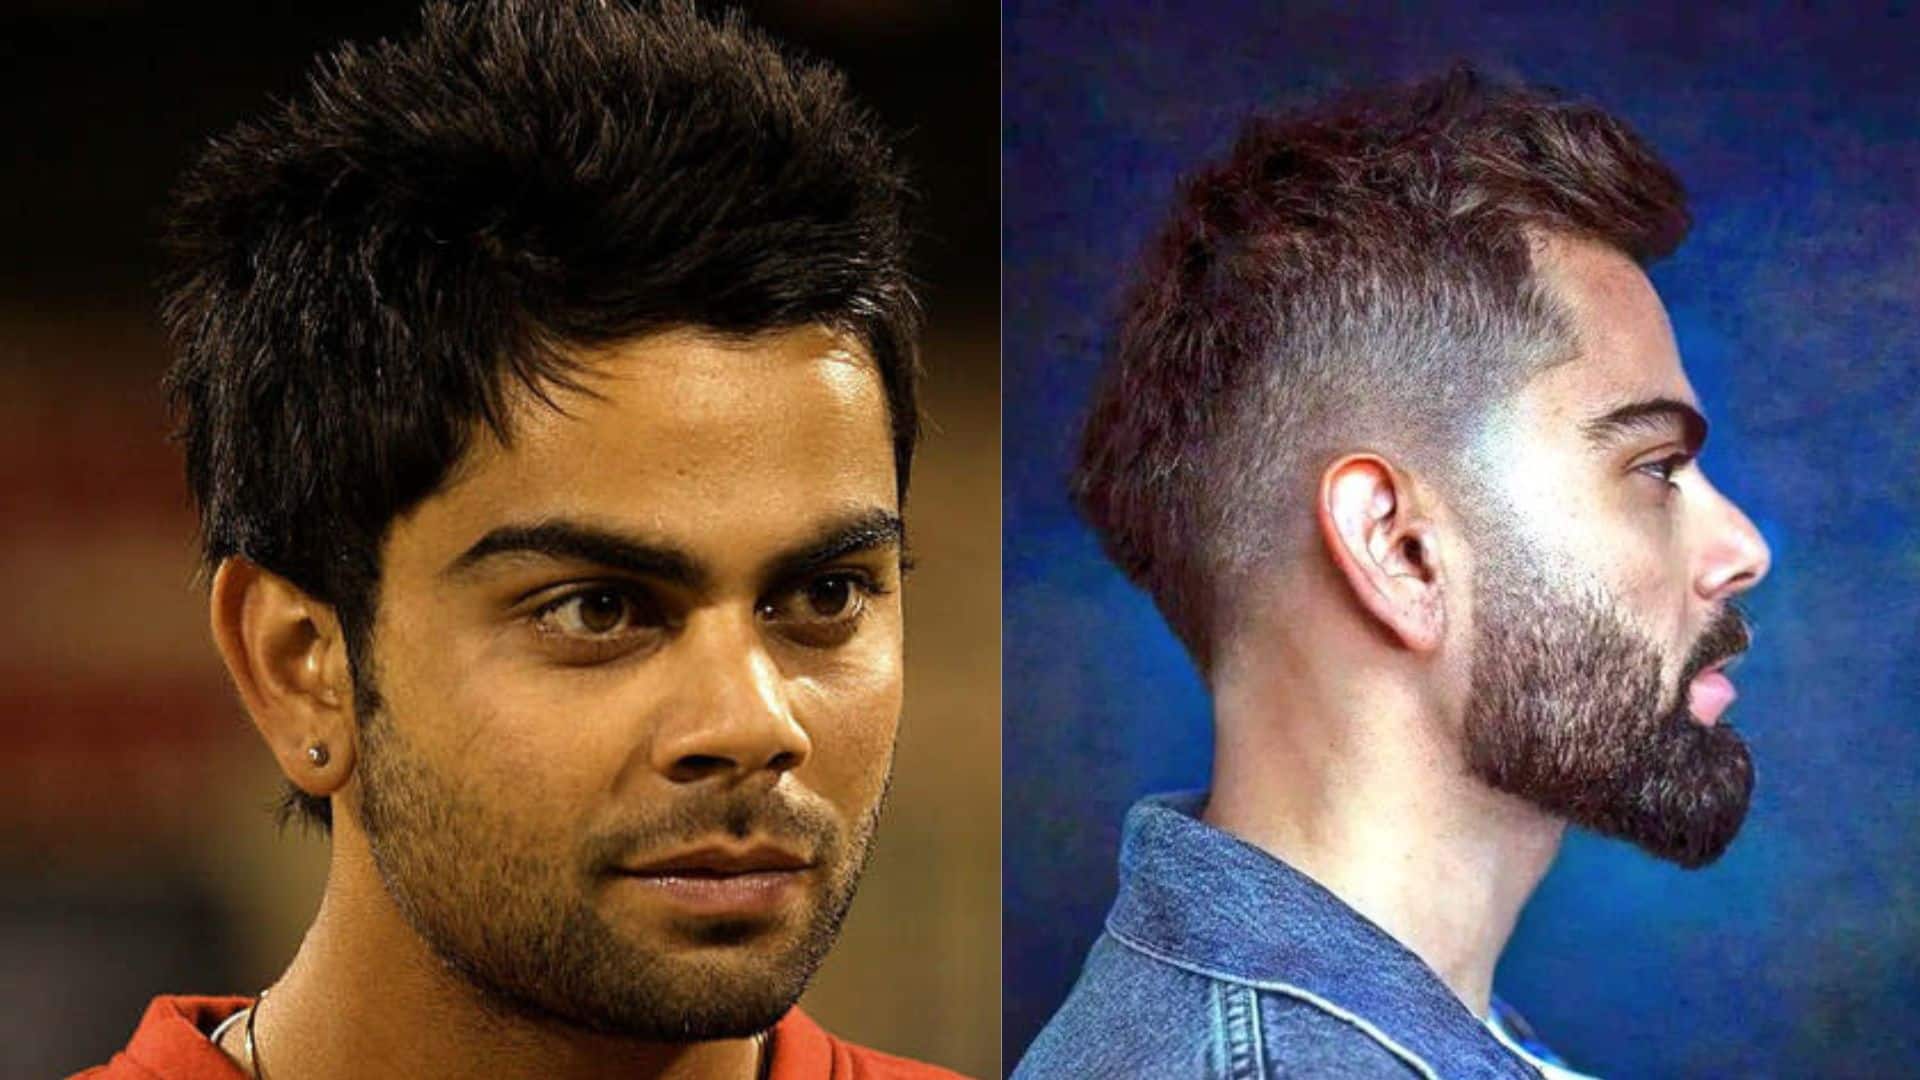 15 Awesome Virat Kohli Hairstyles You Should Try This Year | Virat kohli  hairstyle, New hair cut style, Long hair styles